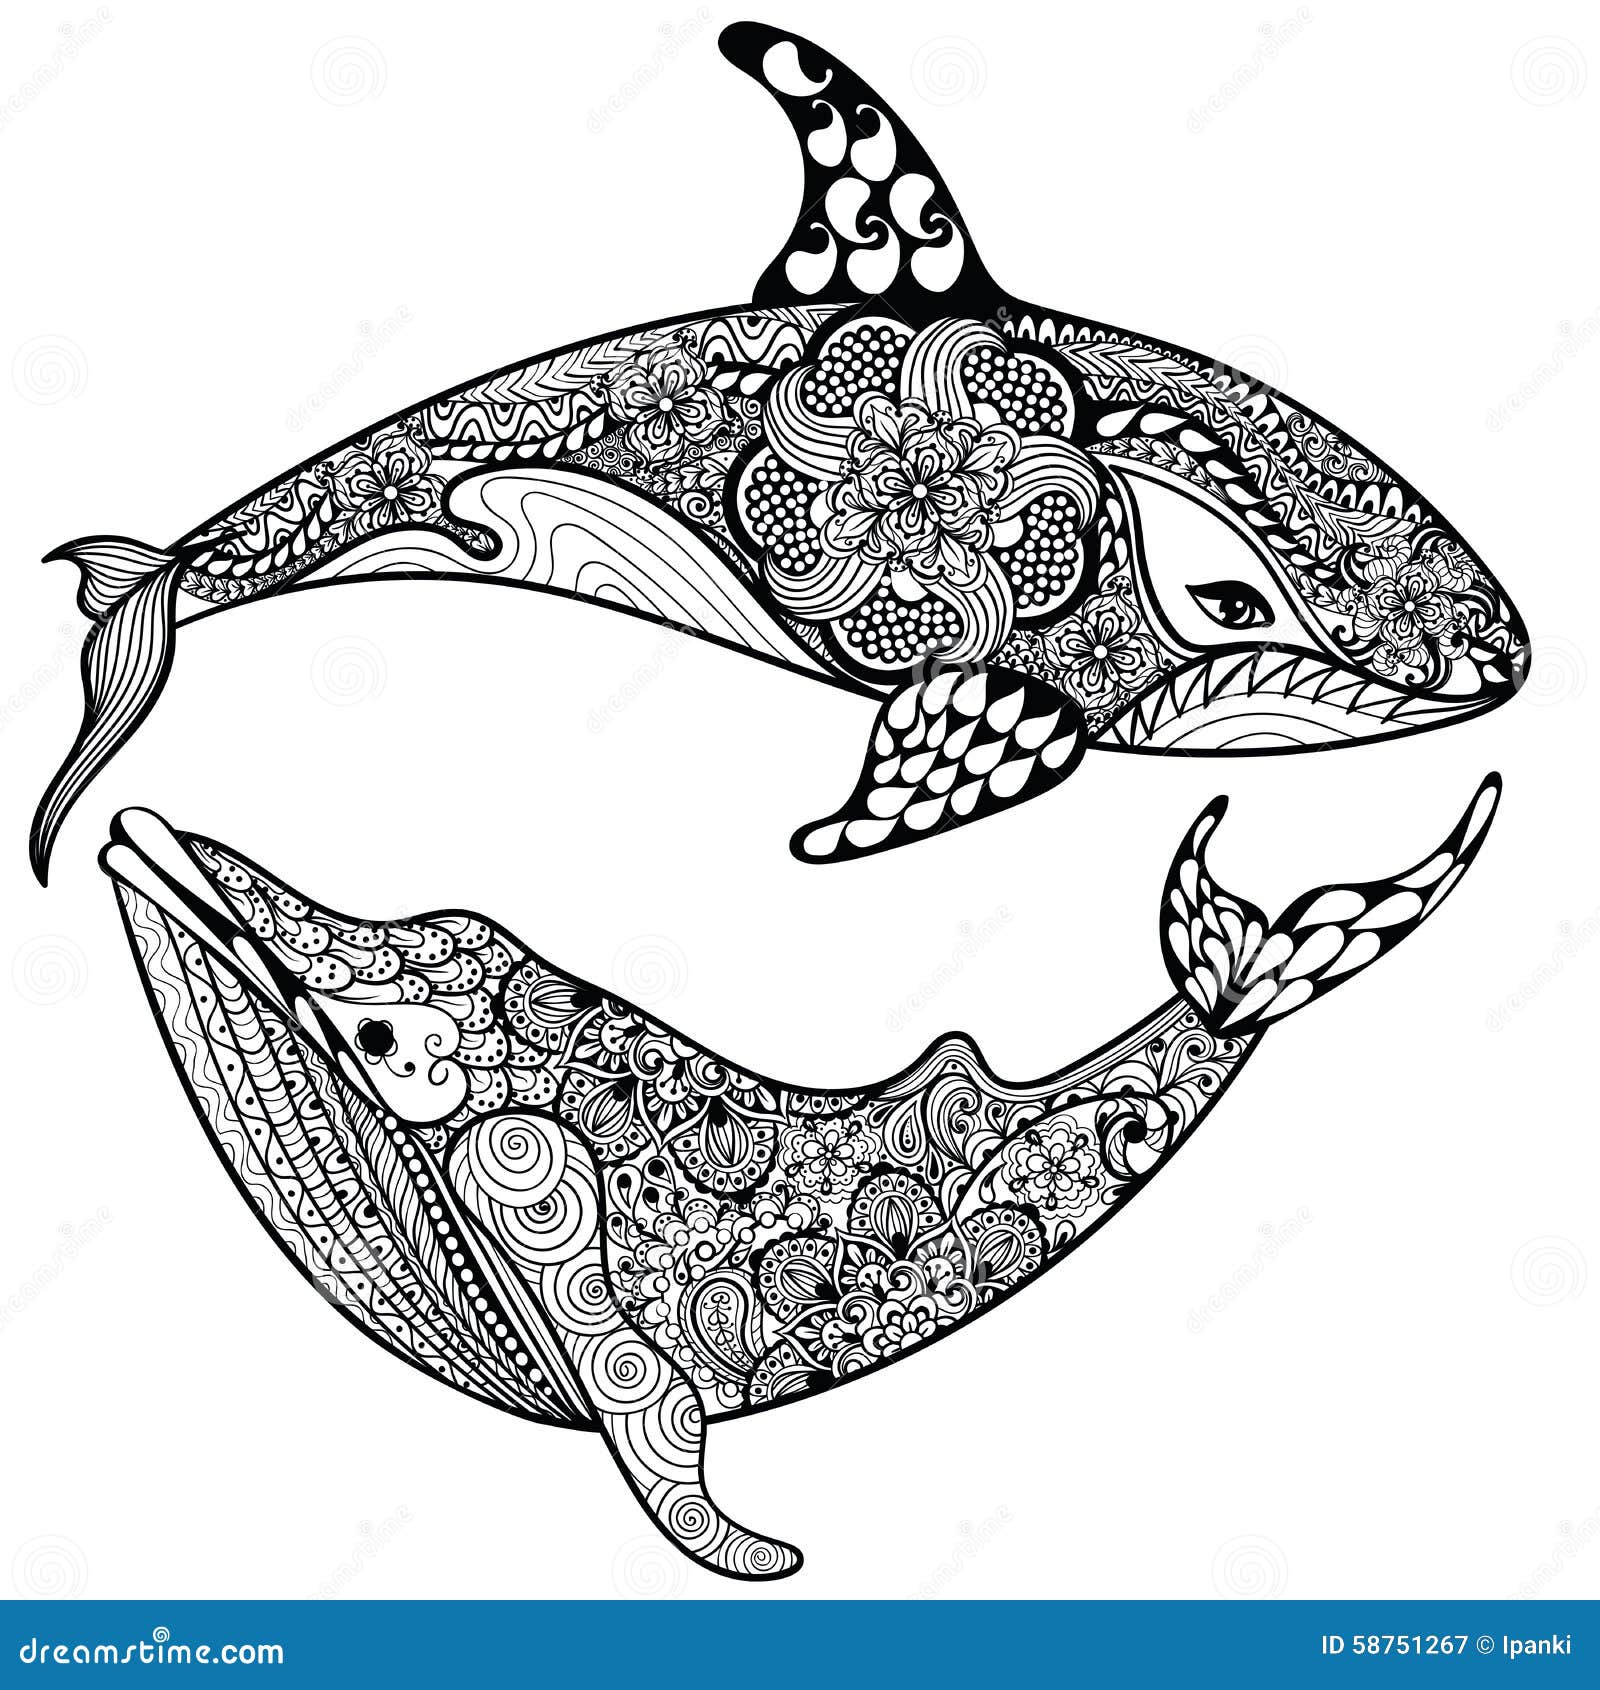 Download Zentangle Stylized Sea Shark And Whale. Hand Drawn Vector Illust Stock Vector - Image: 58751267